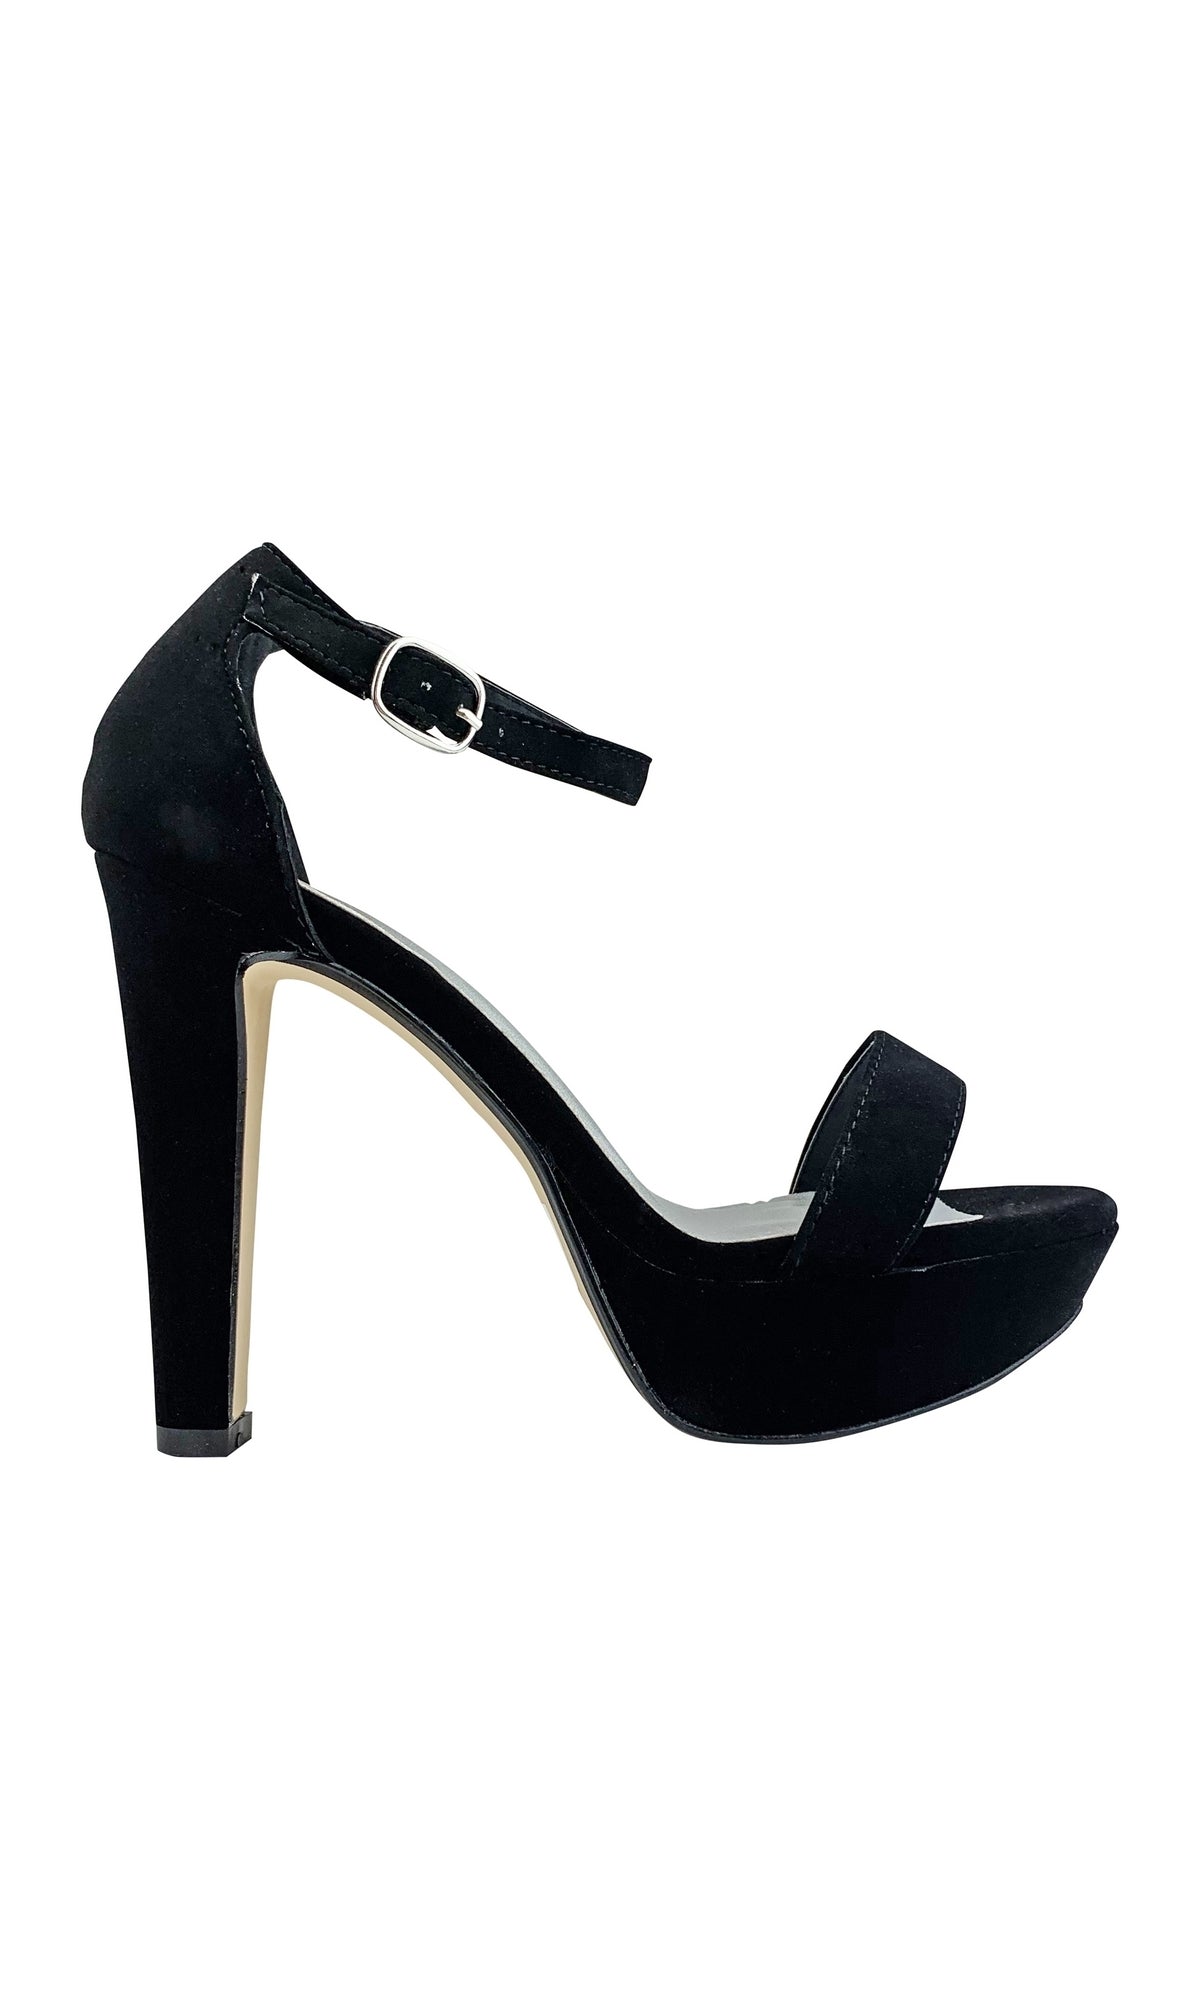 Black Imitation Suede Mary Sandal with a High Heel 4367